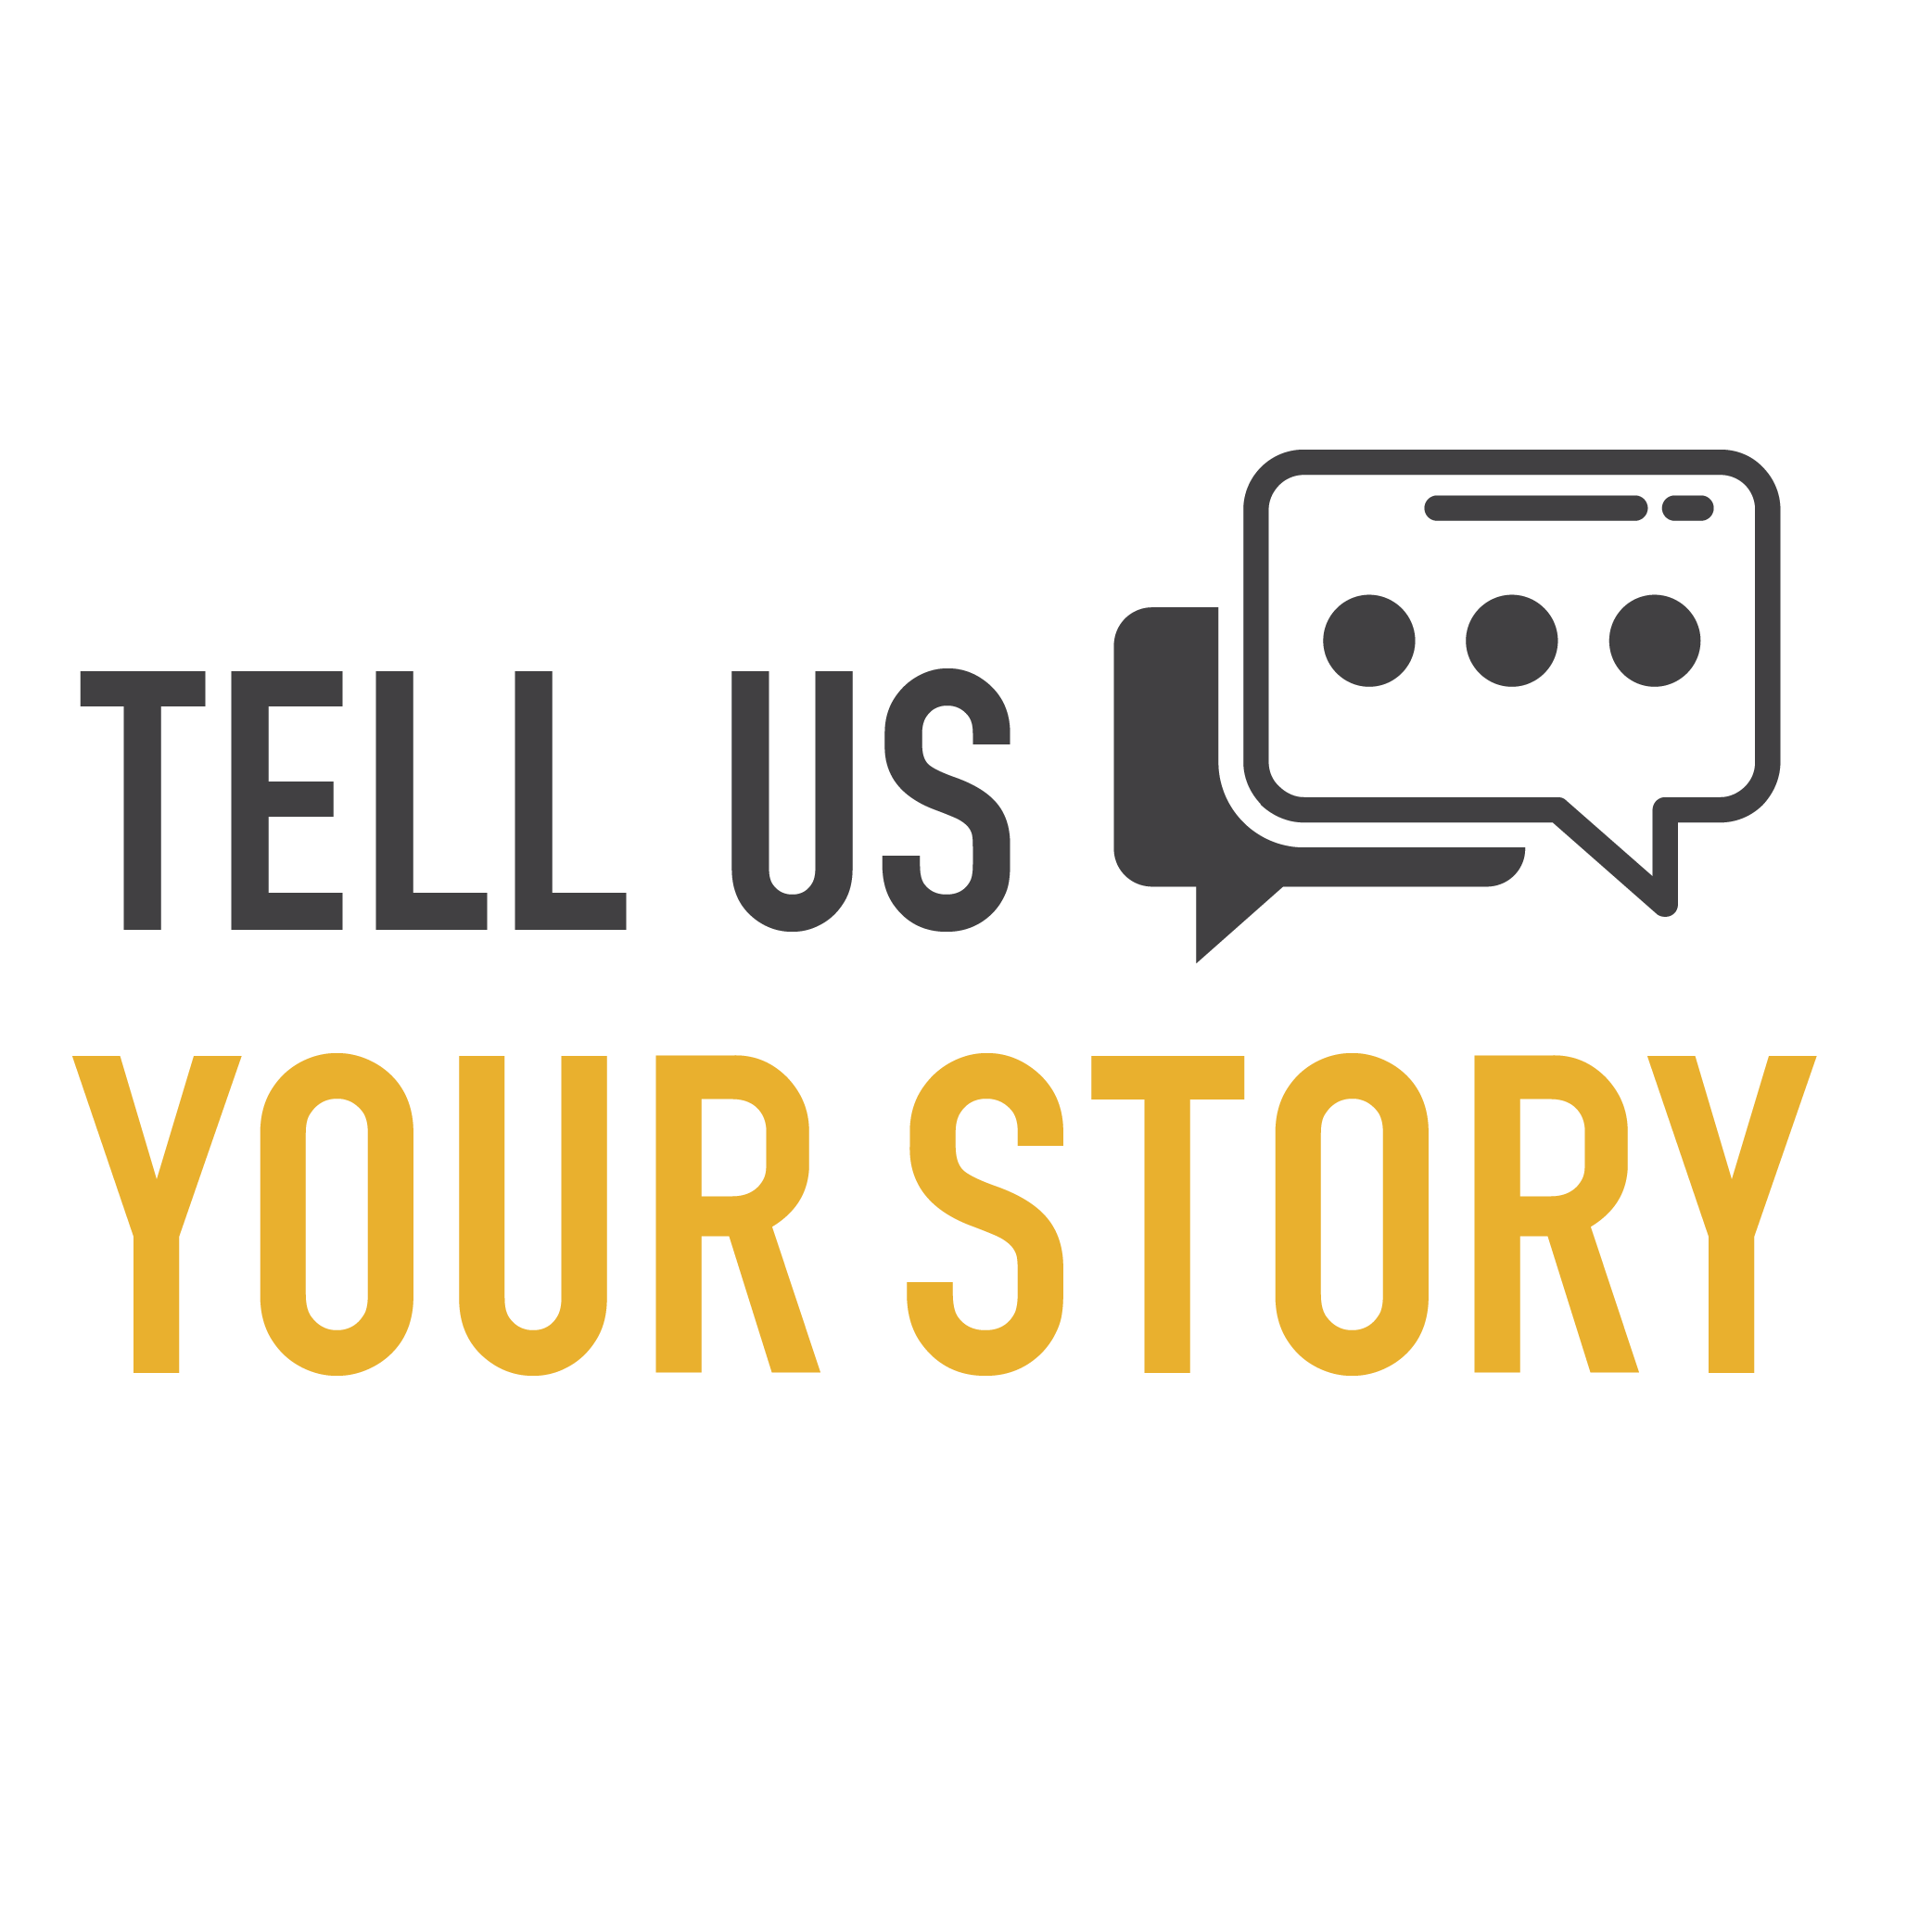 *Tell Us Your Story image